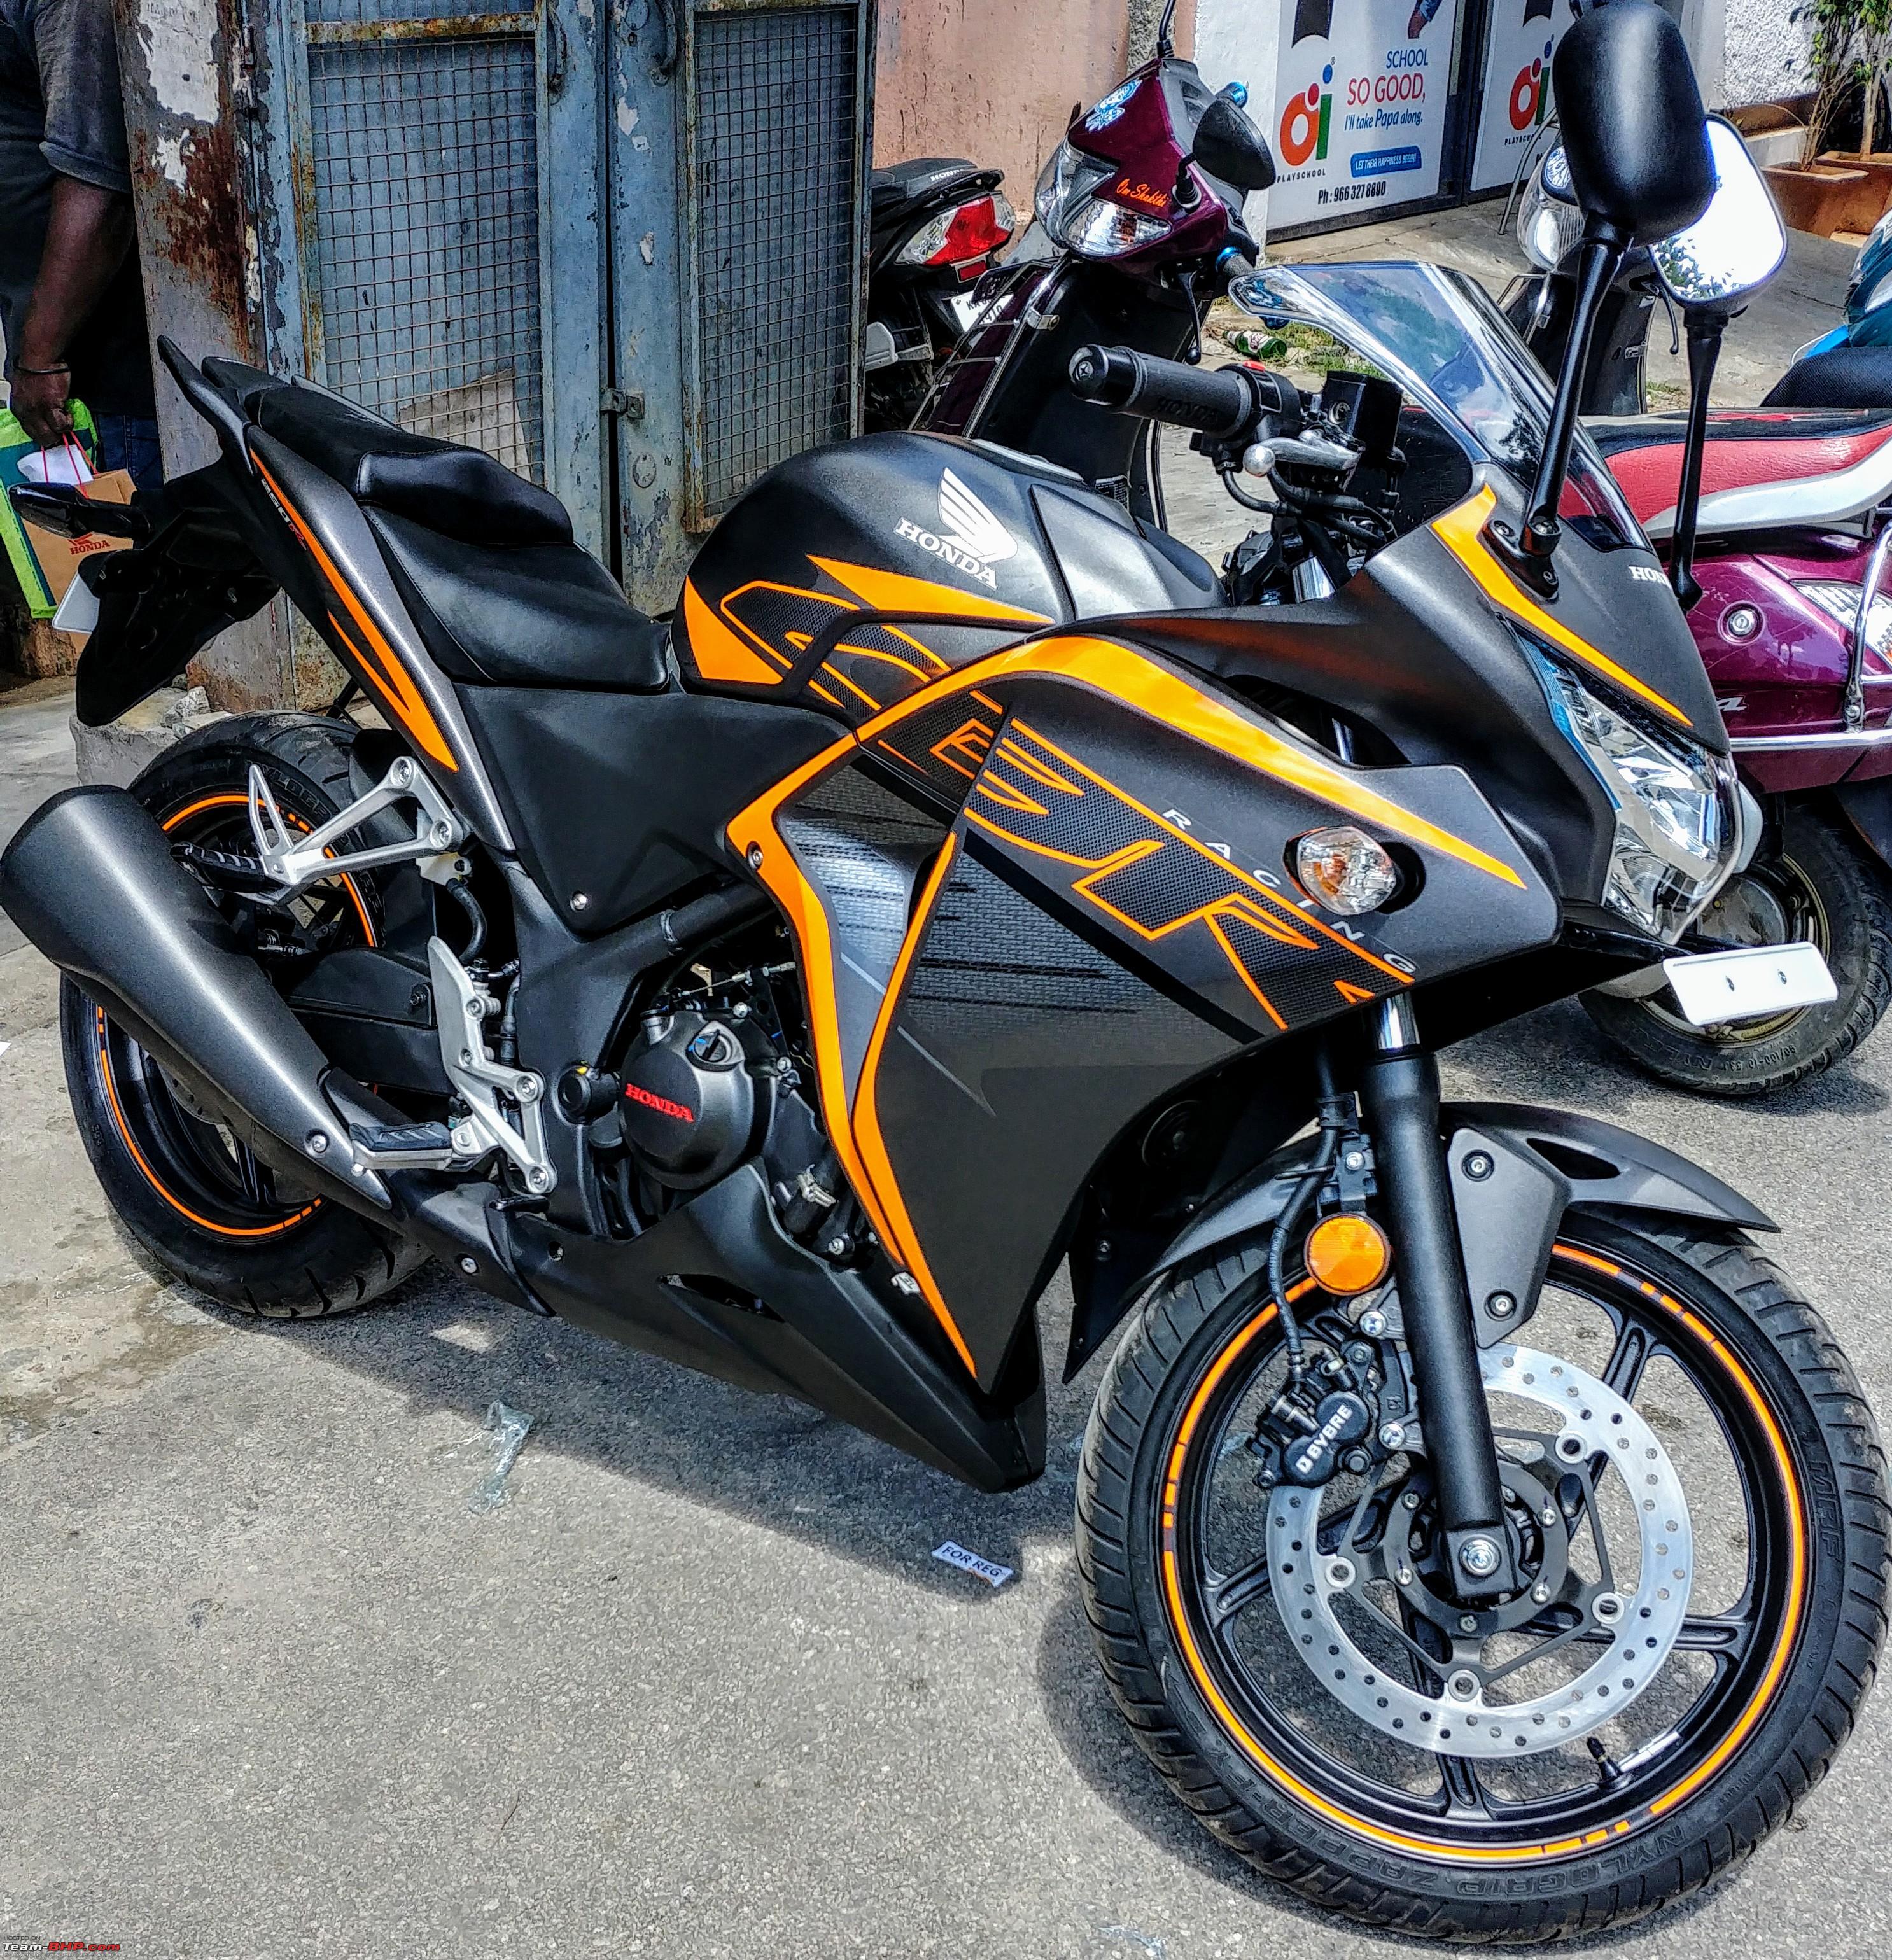 18 Honda Cbr 250r Launched At Rs 1 63 Lakh Page 3 Team Bhp